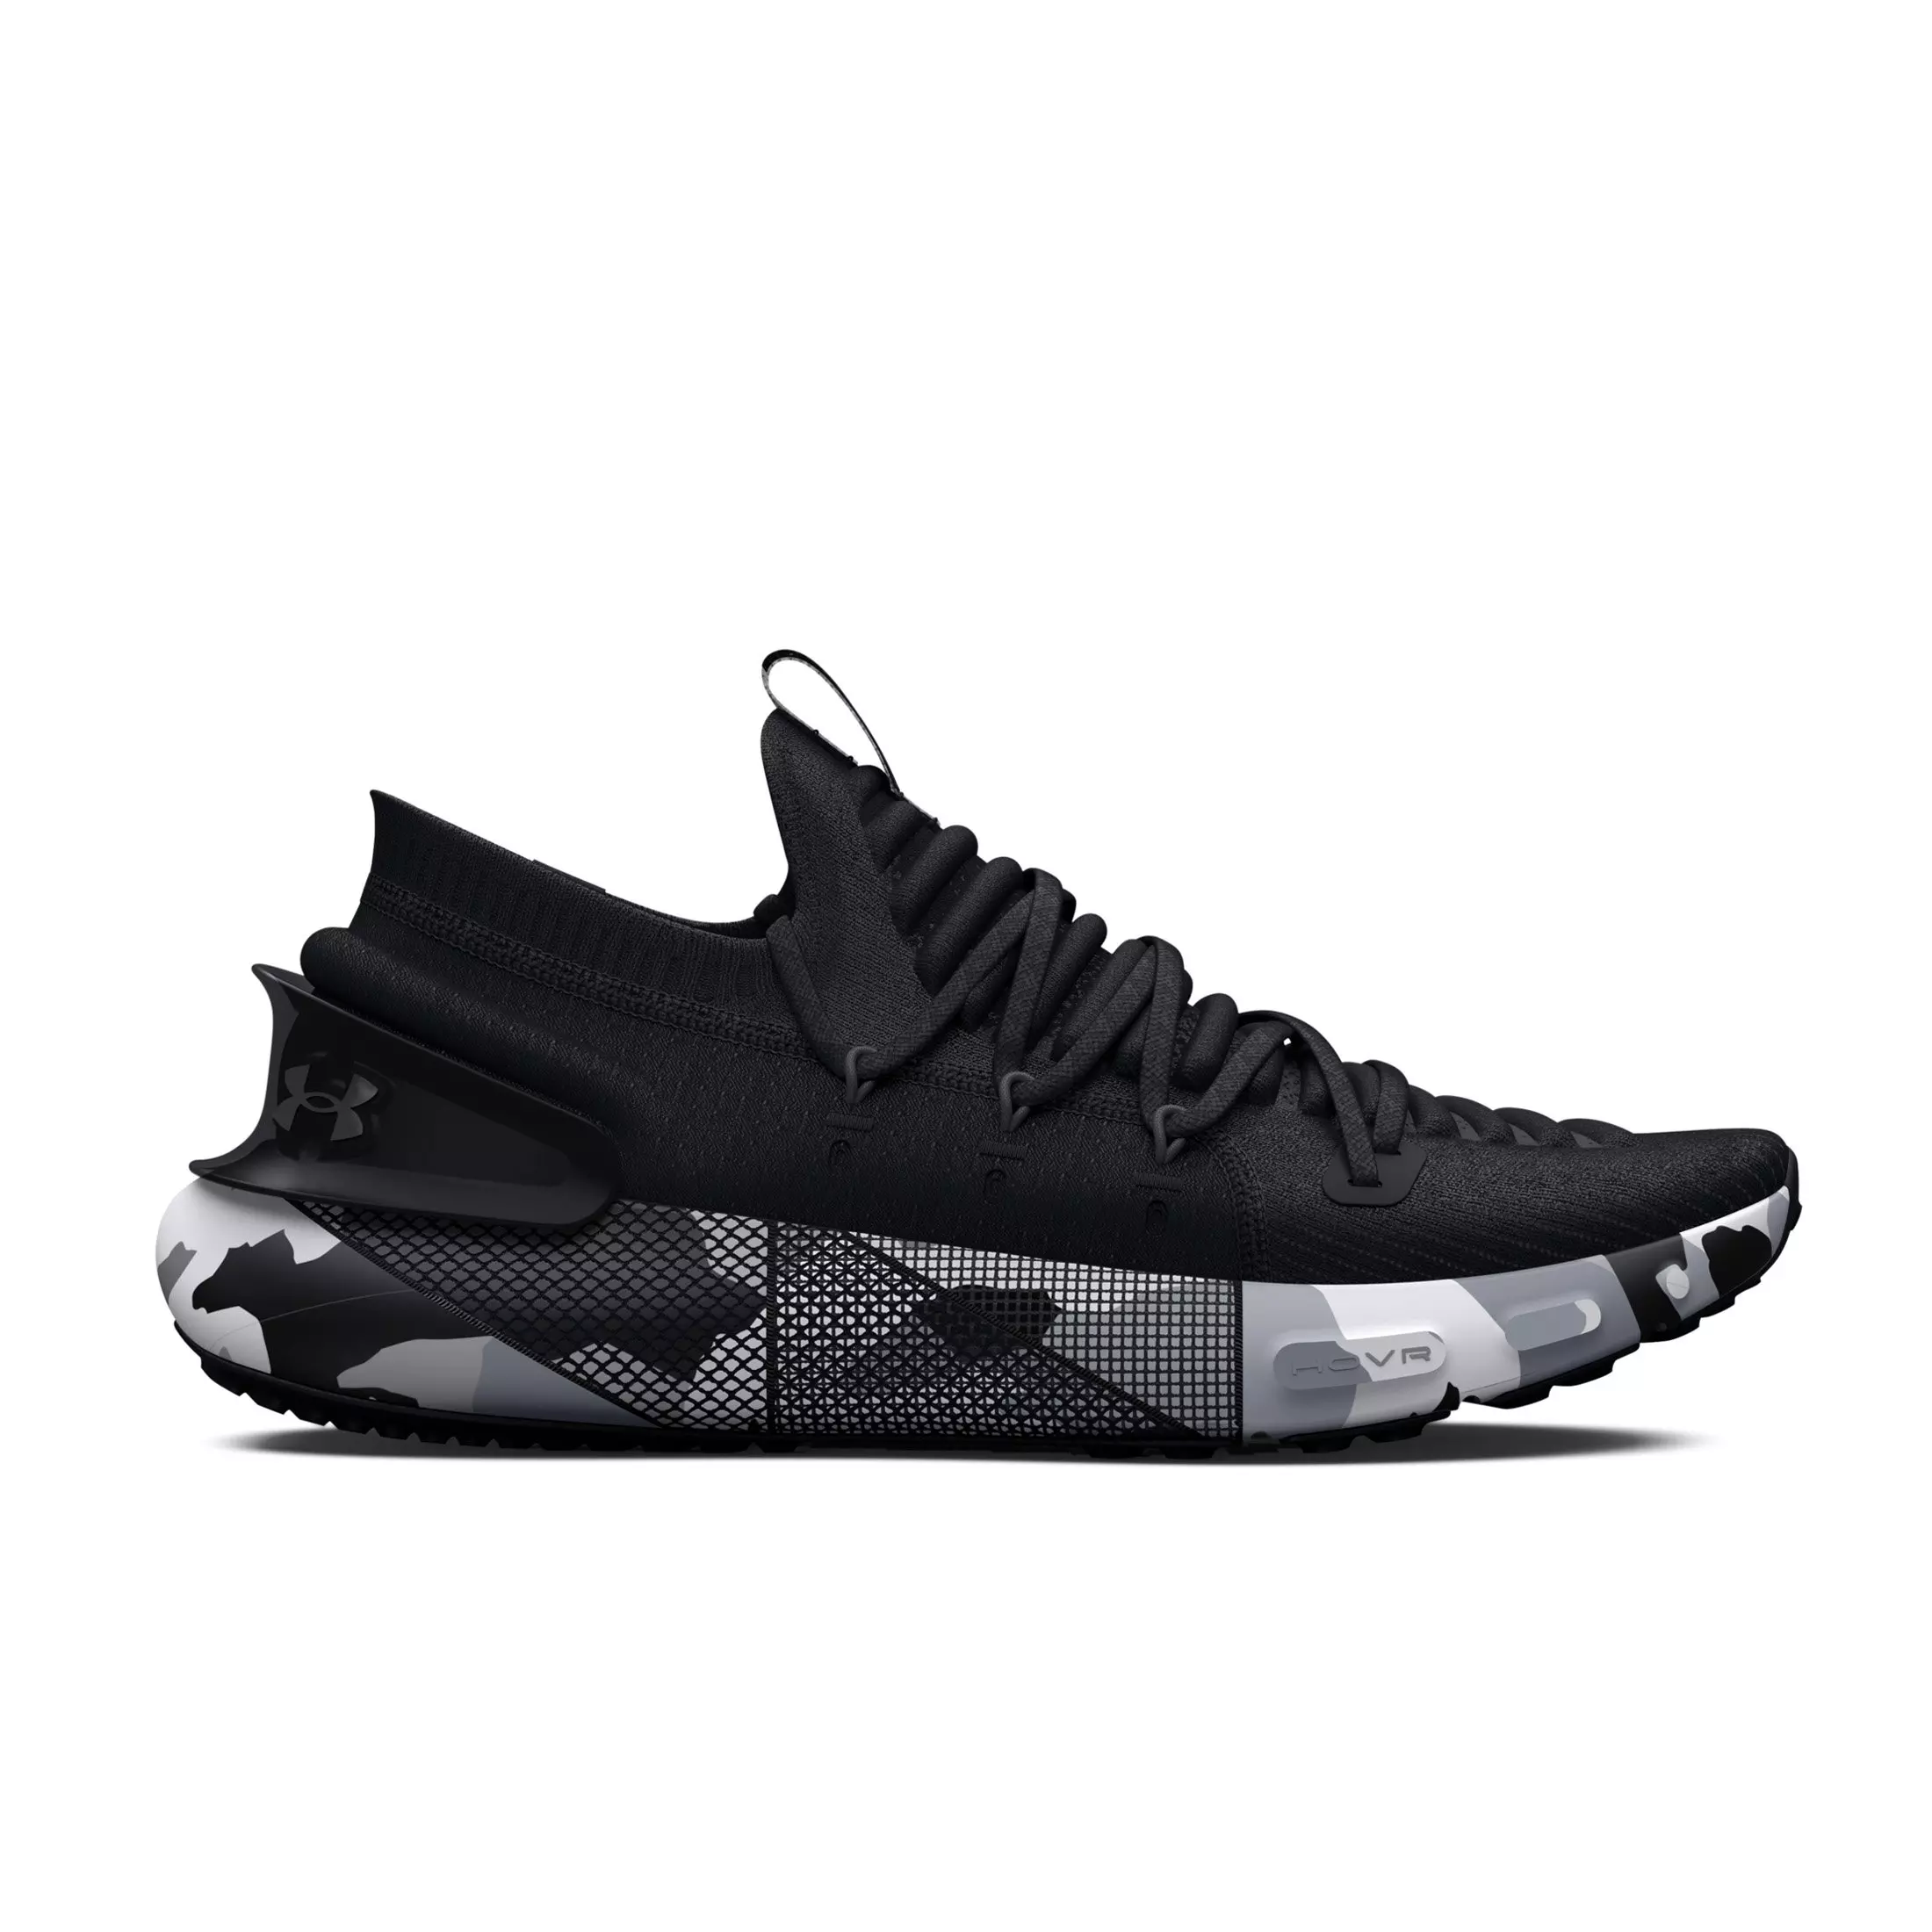 Under Armour HOVR Phantom 3 trainers with sole detail in black